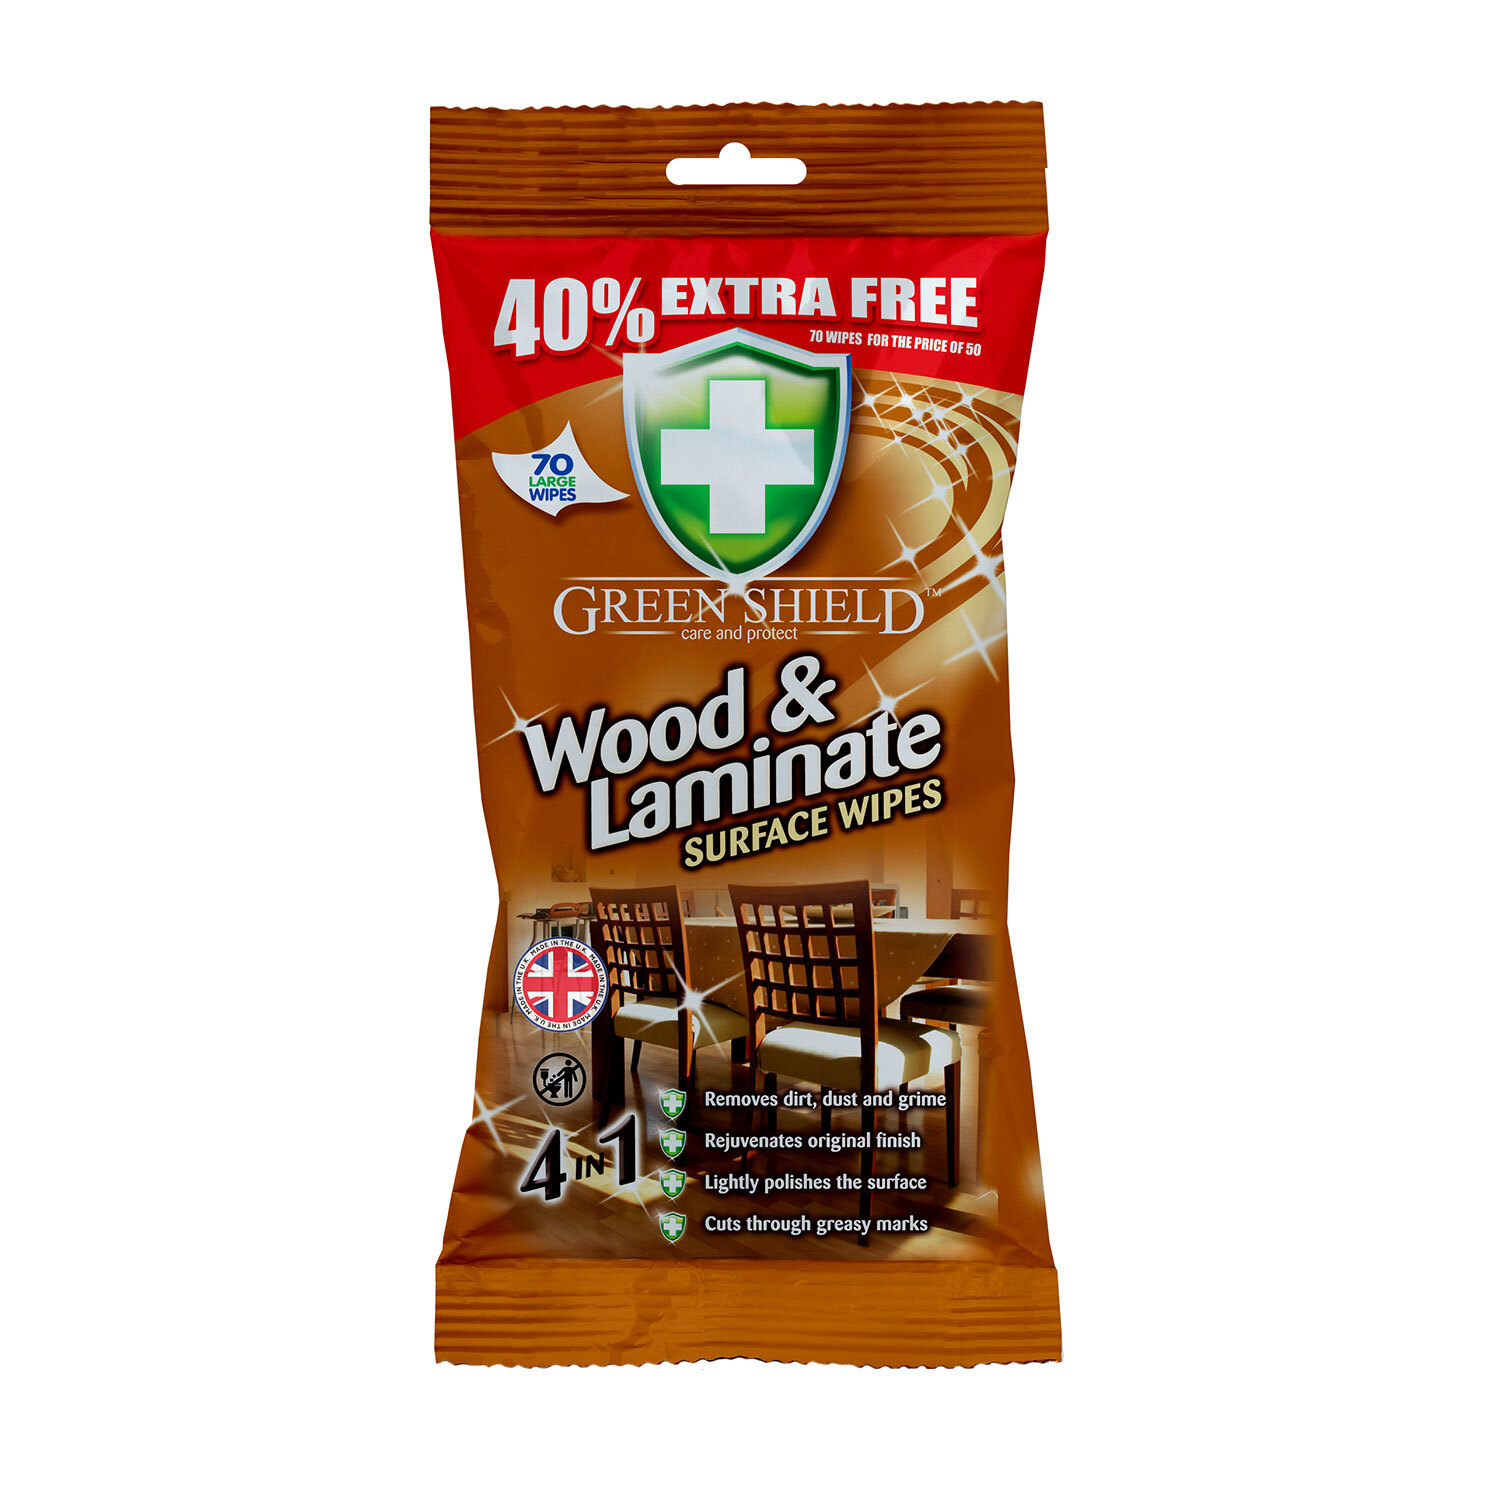 Green Shield Wood and Laminate Surface Wipes 70 Pack Image